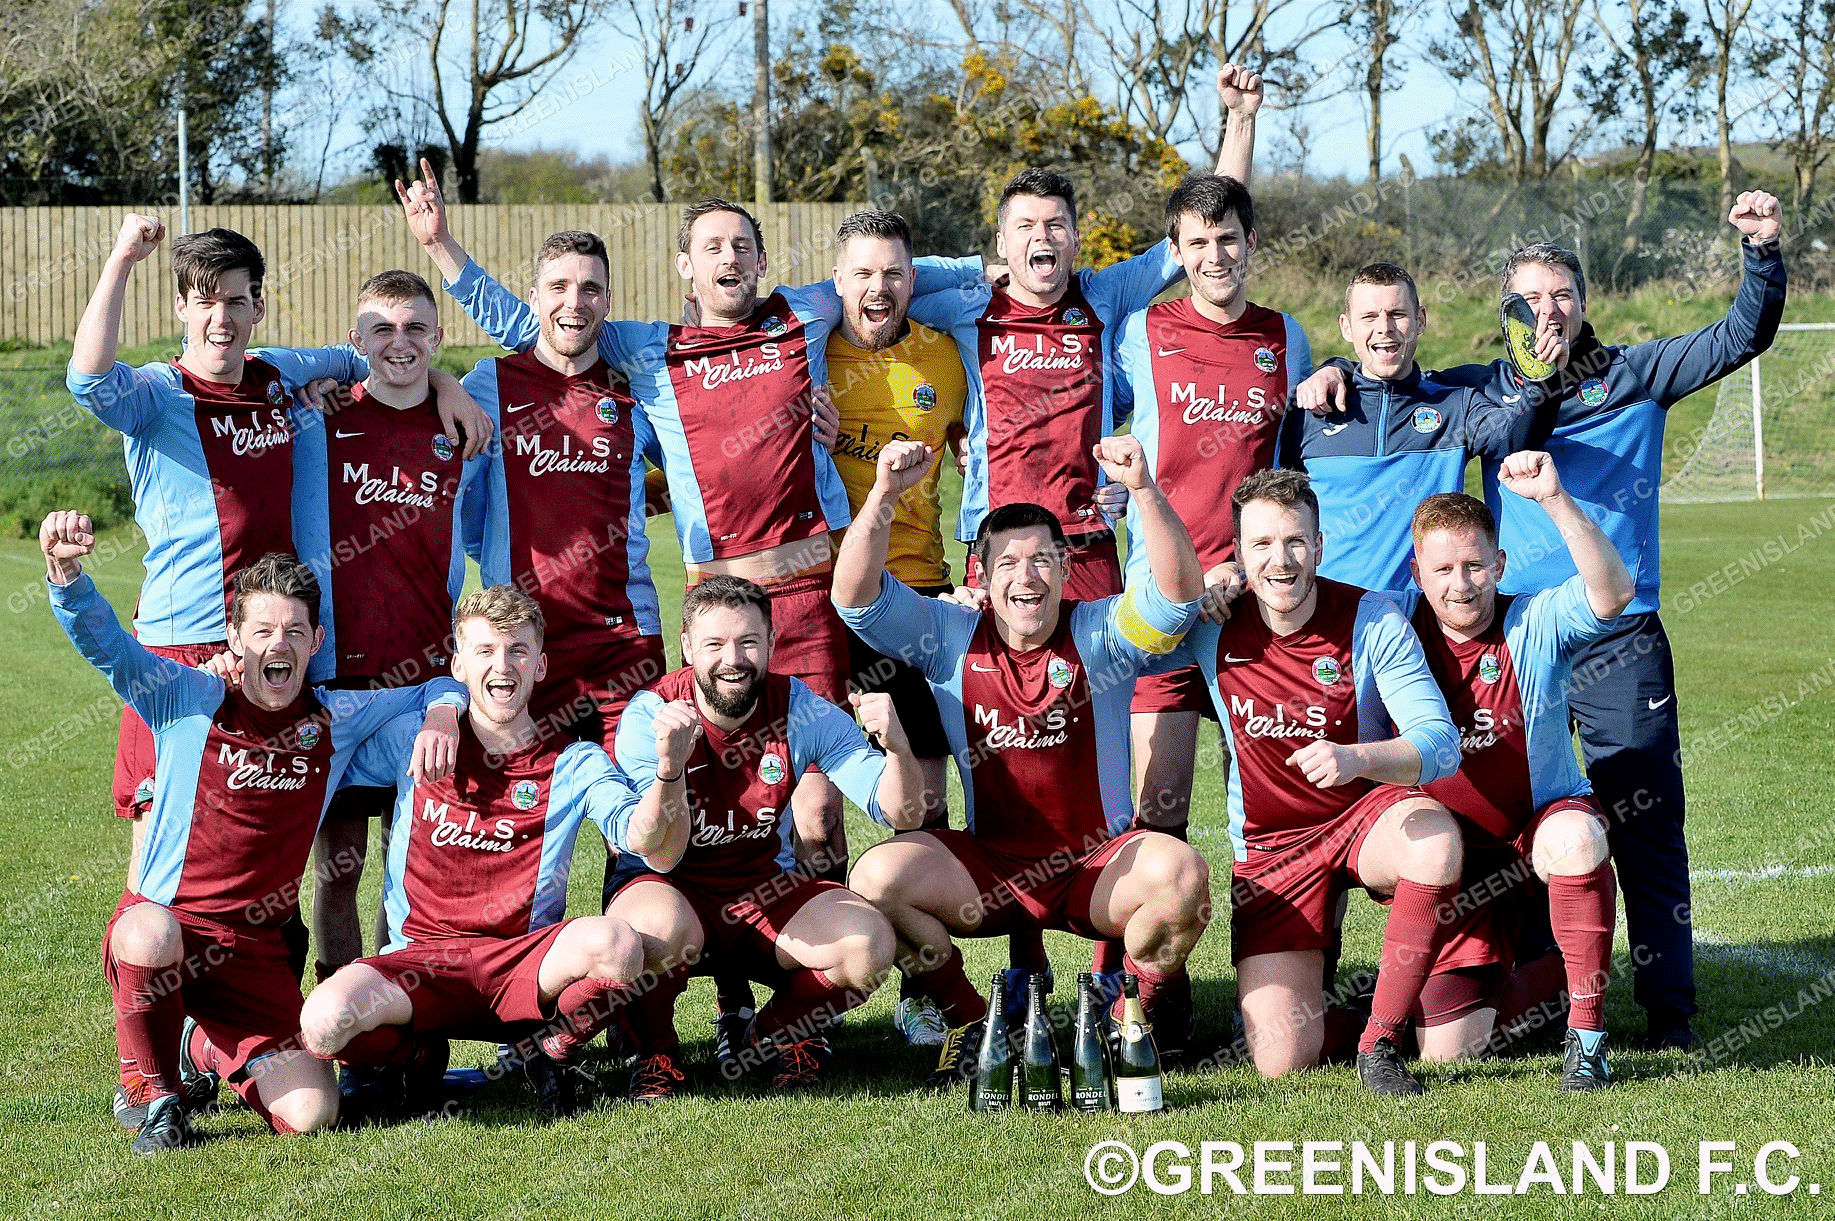 MIS Claims would like to wish a Massive Congratulations to Greenisland FC!